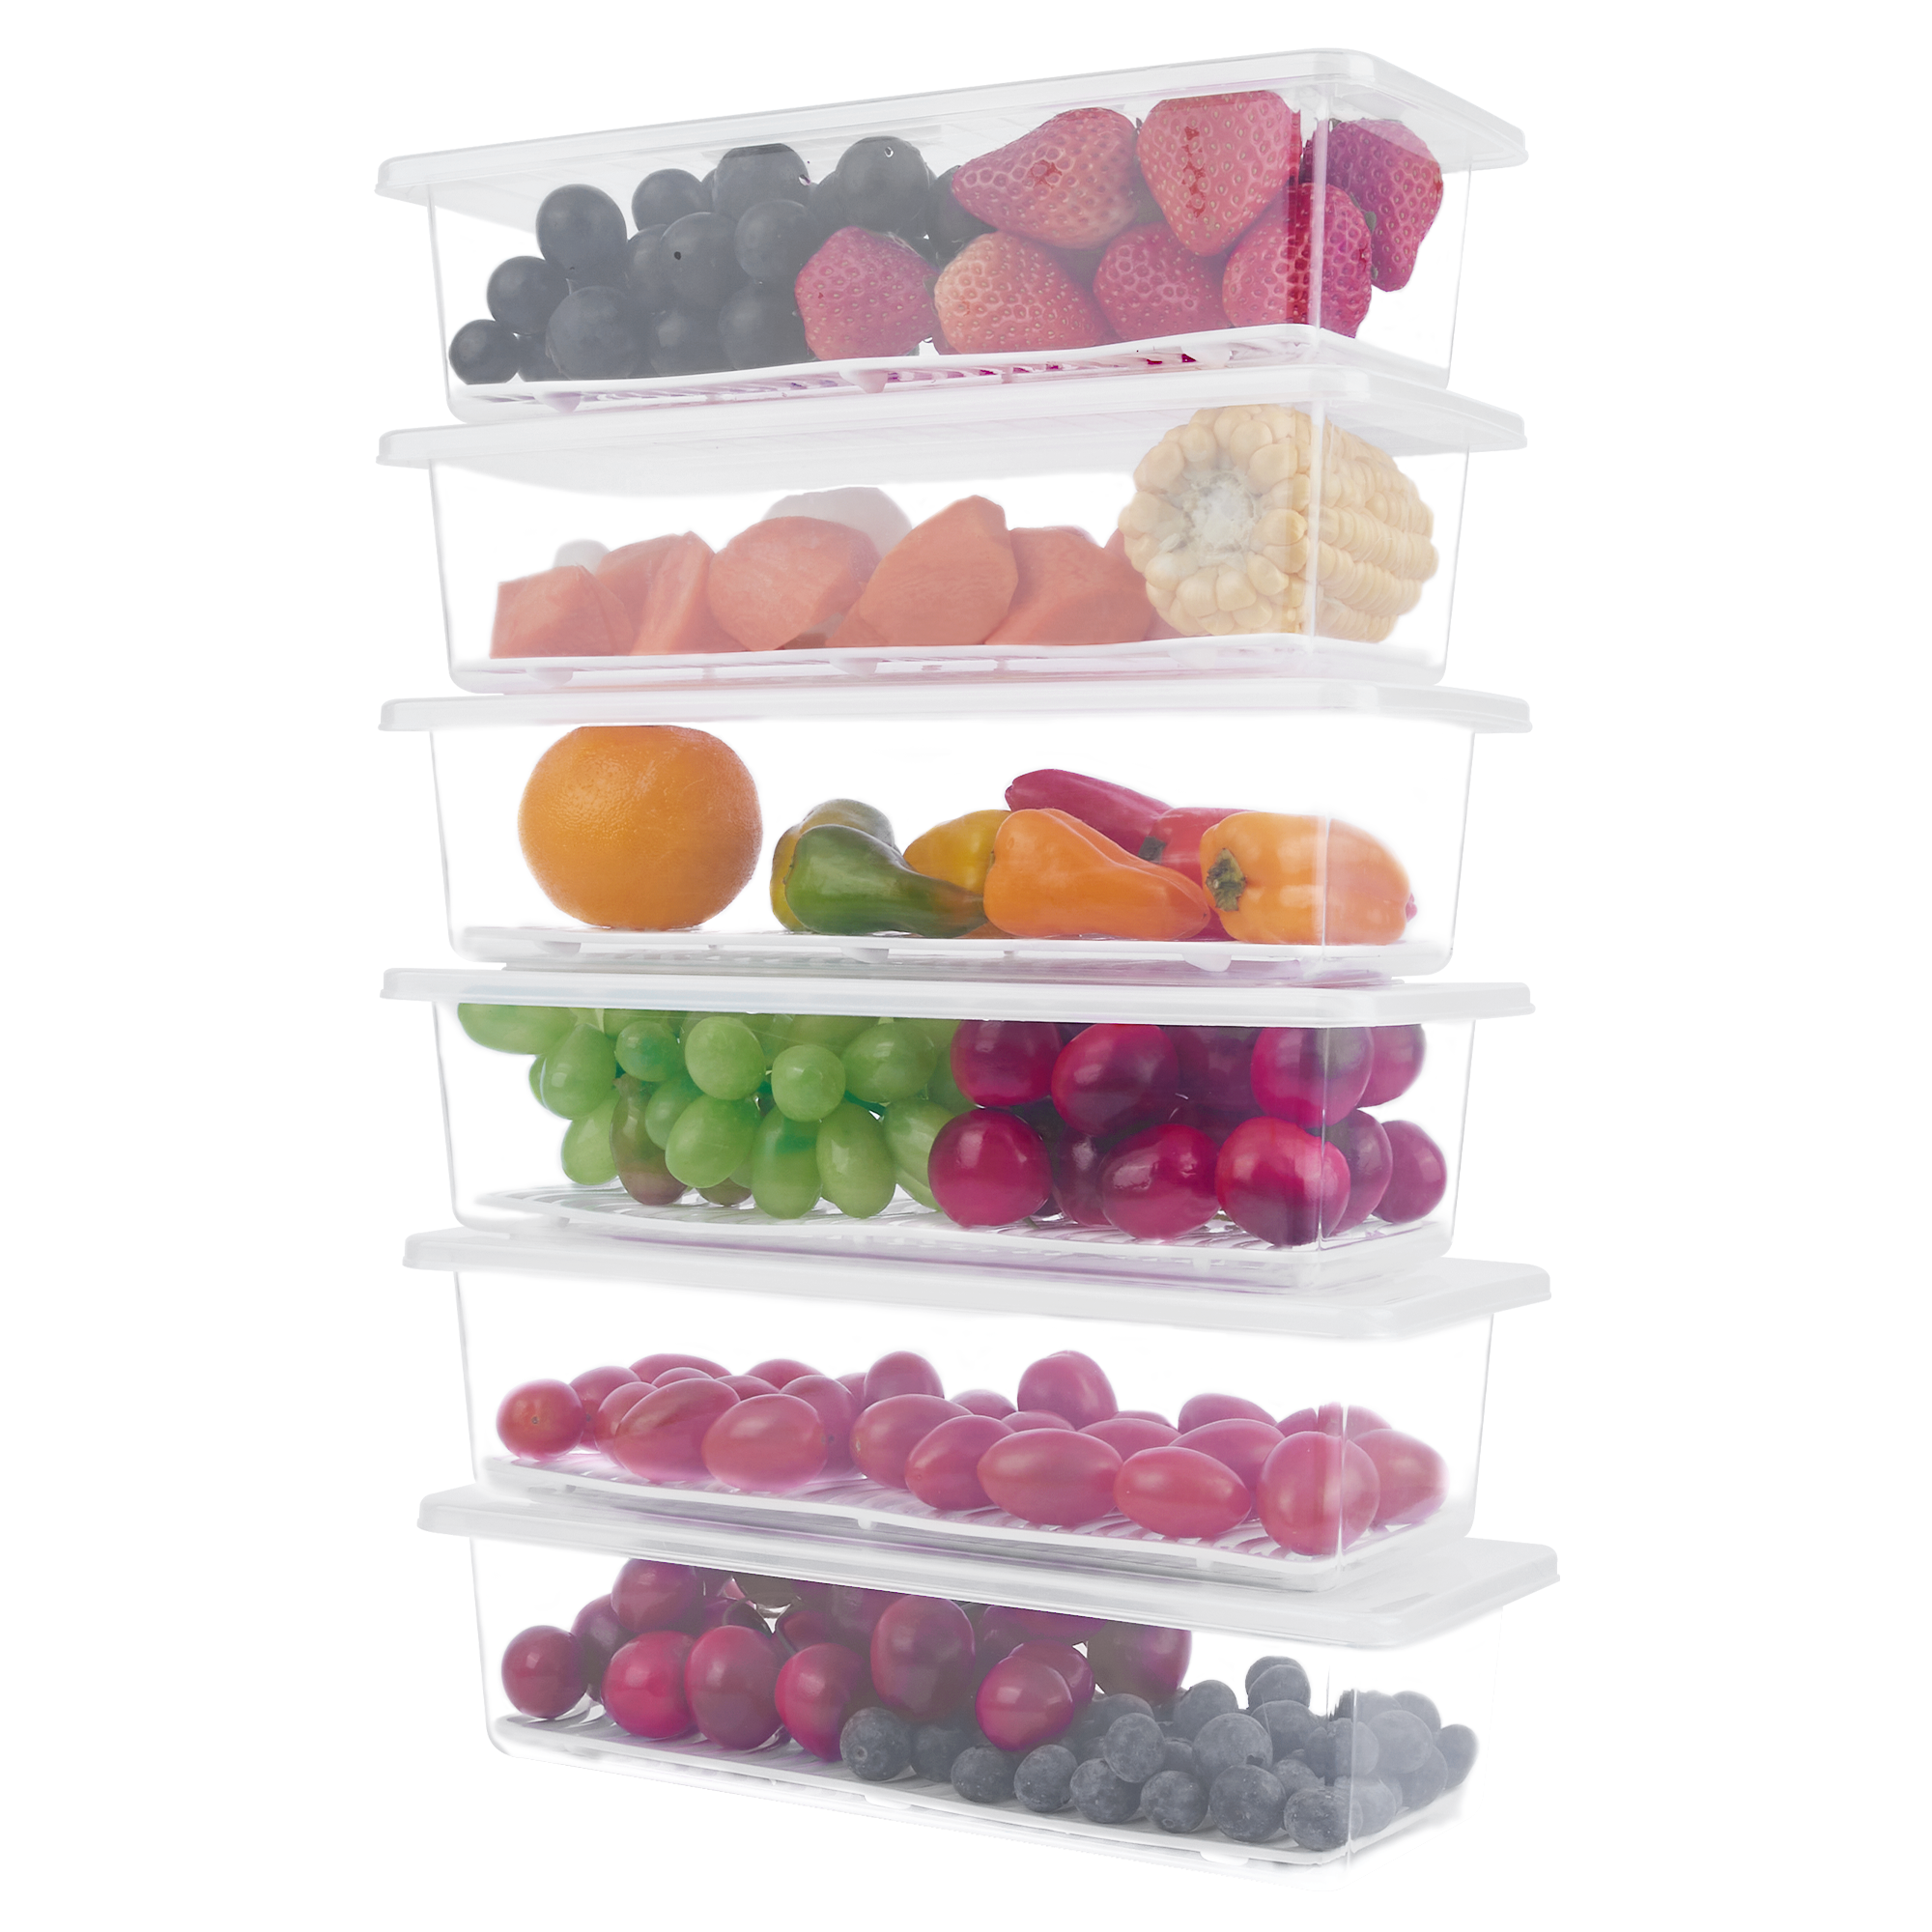 Vtopmart Extra Large Food Storage Containers 5.2L / 176oz, 4 Pieces